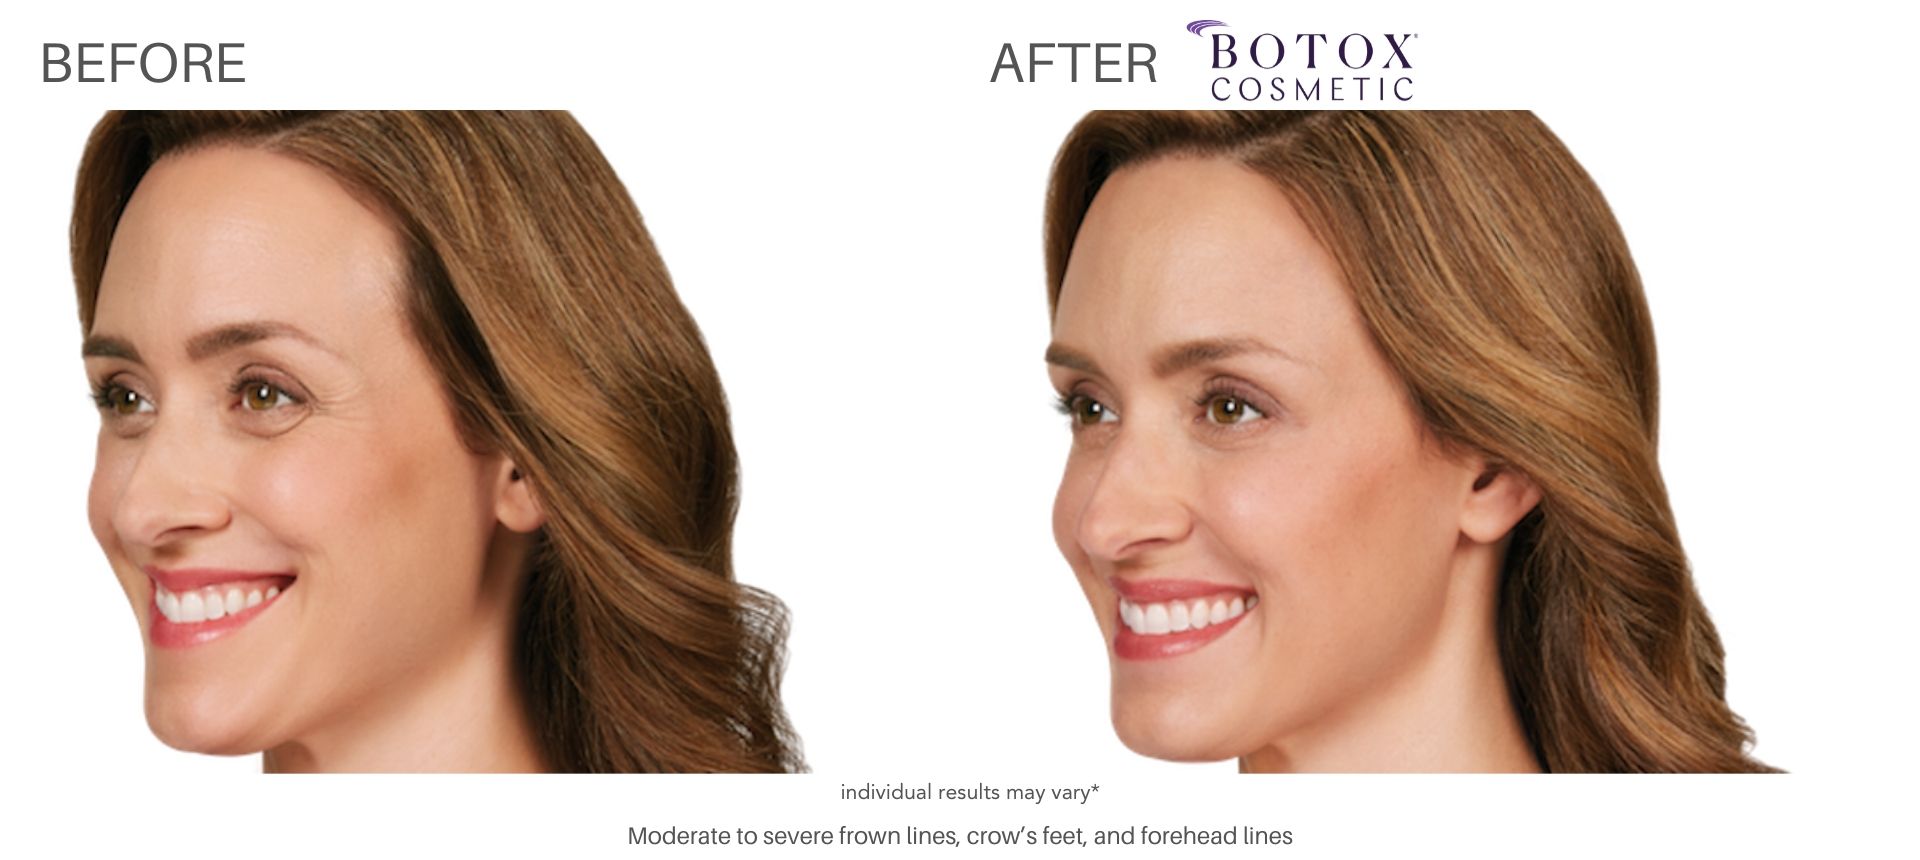 Woman's botox before and after images transformation of crows feet wrinkles.